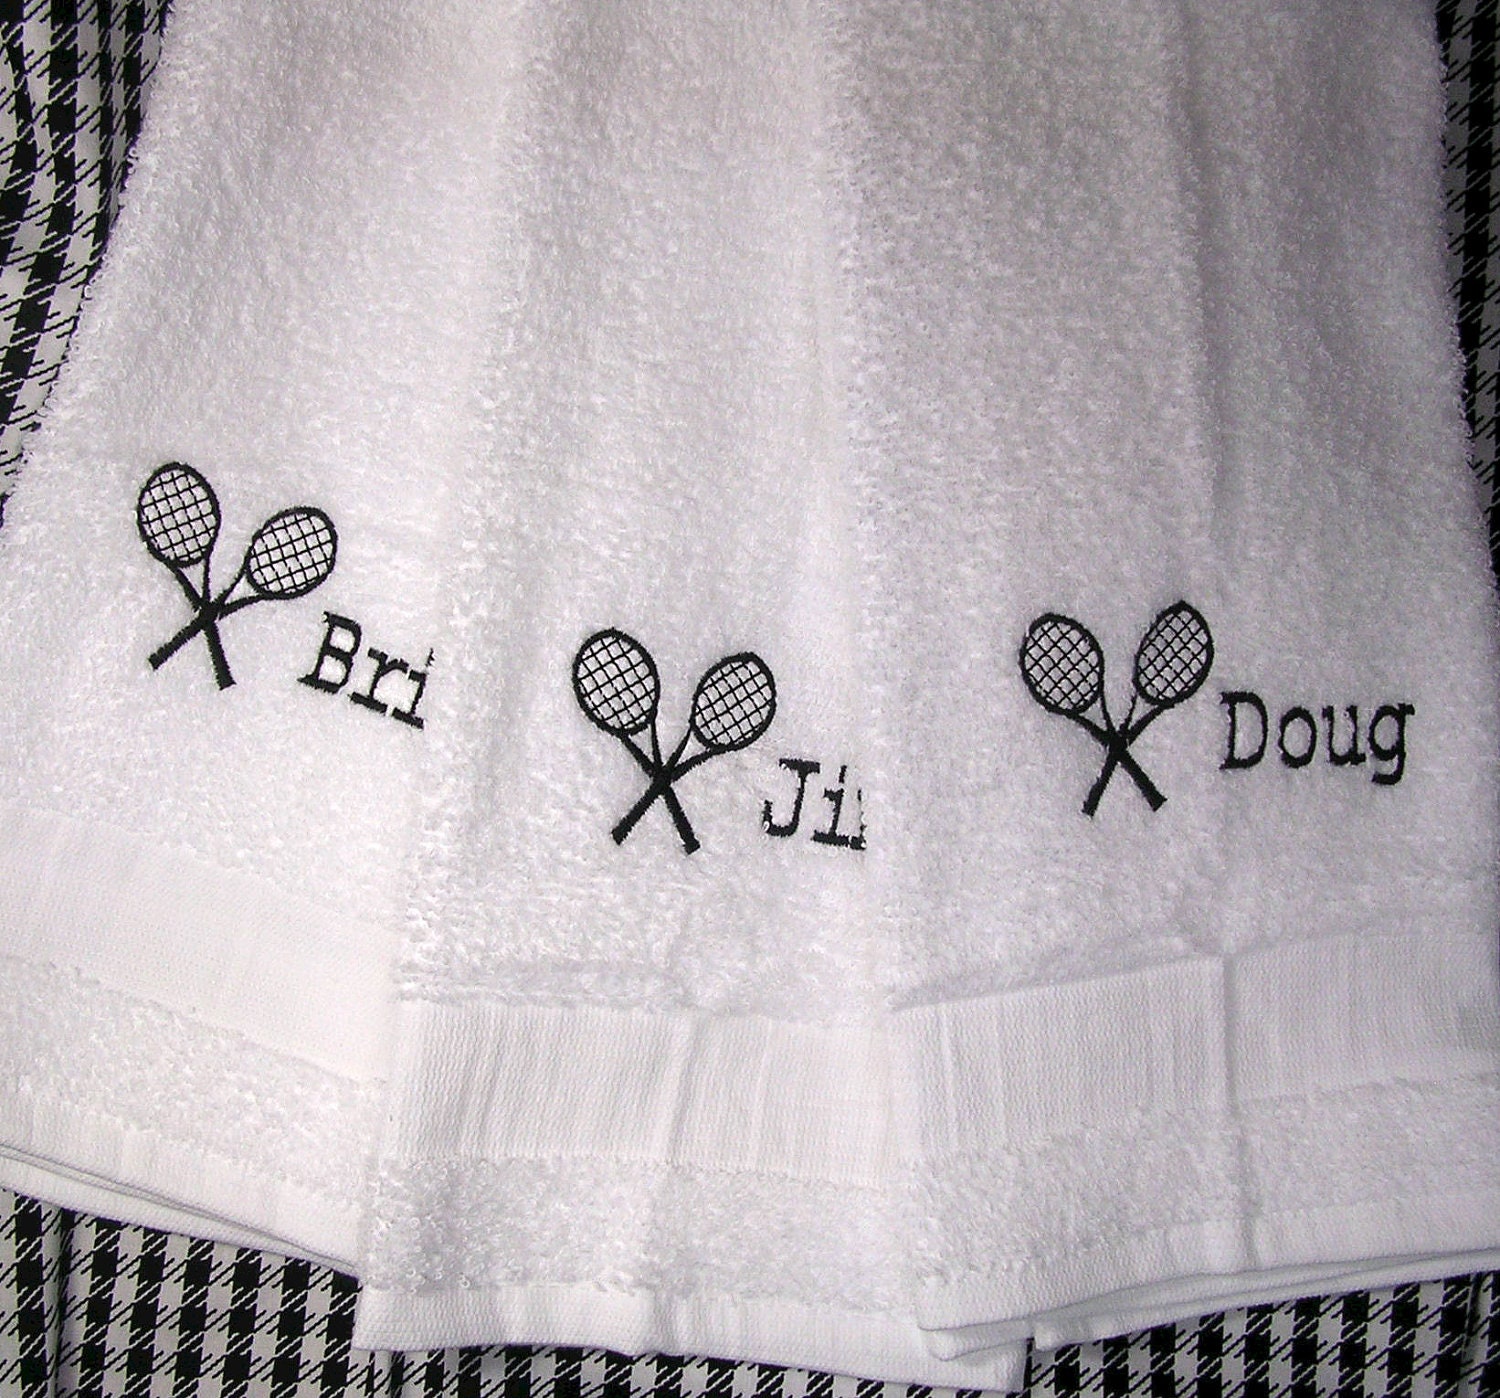 Personalized Tennis Racket Sweat Towel With Racket Team Uno 